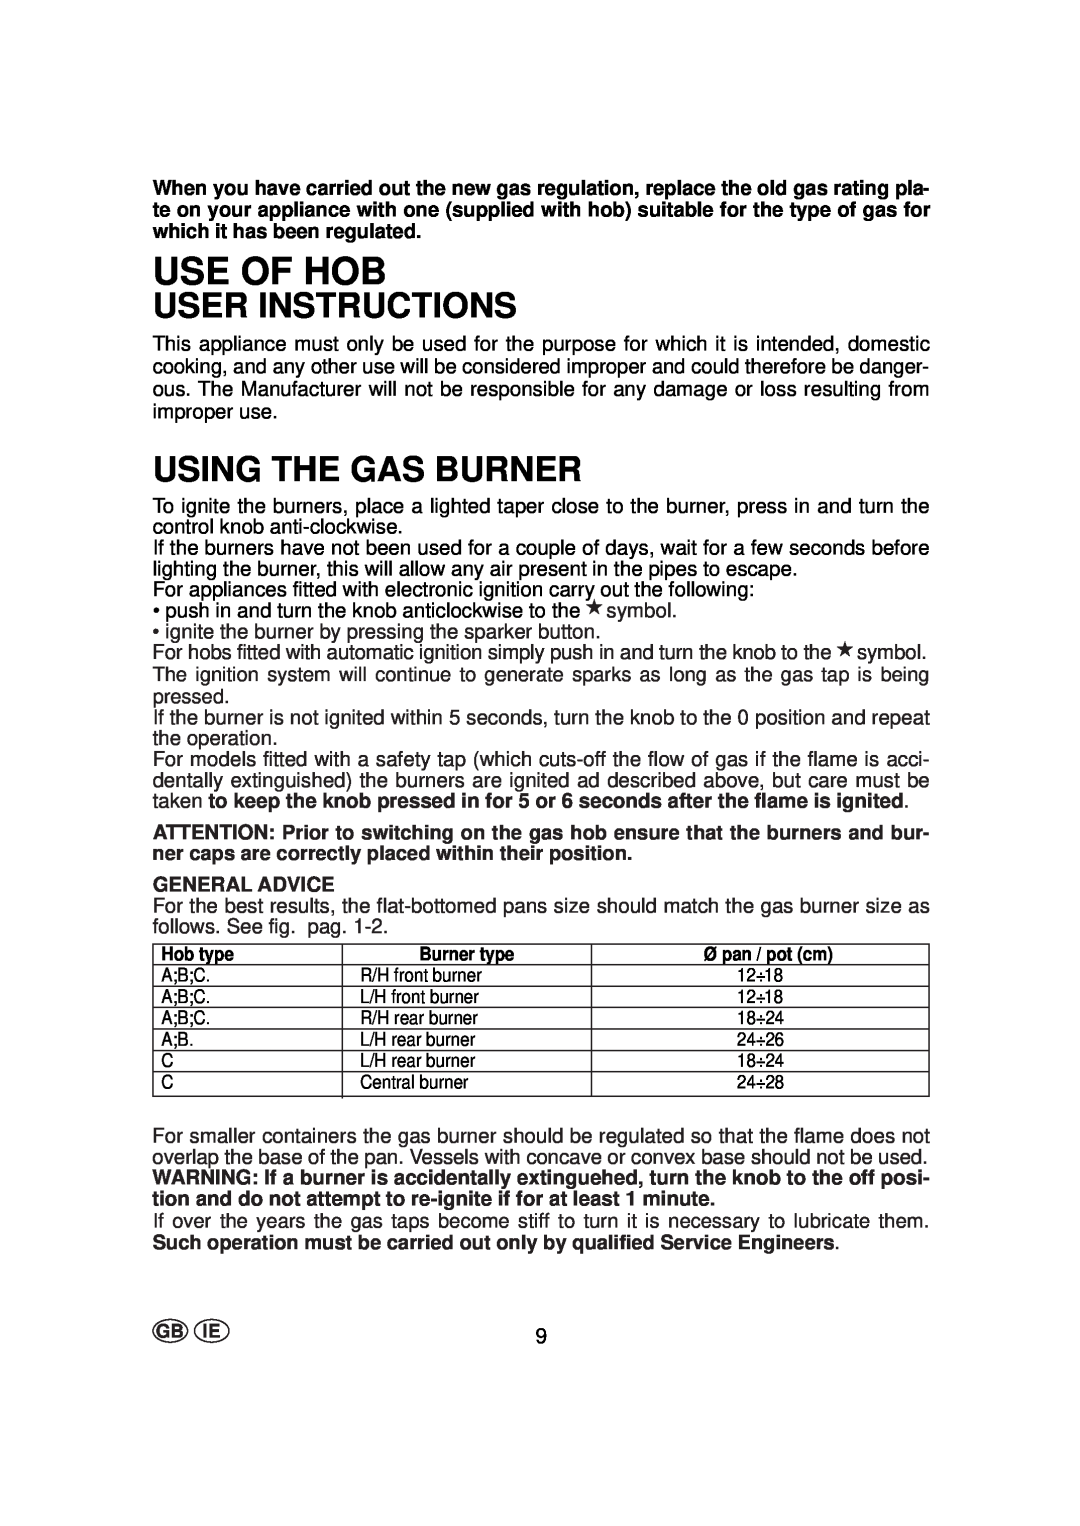 Hoover HGH 640 SW, HGH 640 W, HGH 640 SX, HGD 750 X manual Use Of Hob, User Instructions, Using The Gas Burner, General Advice 